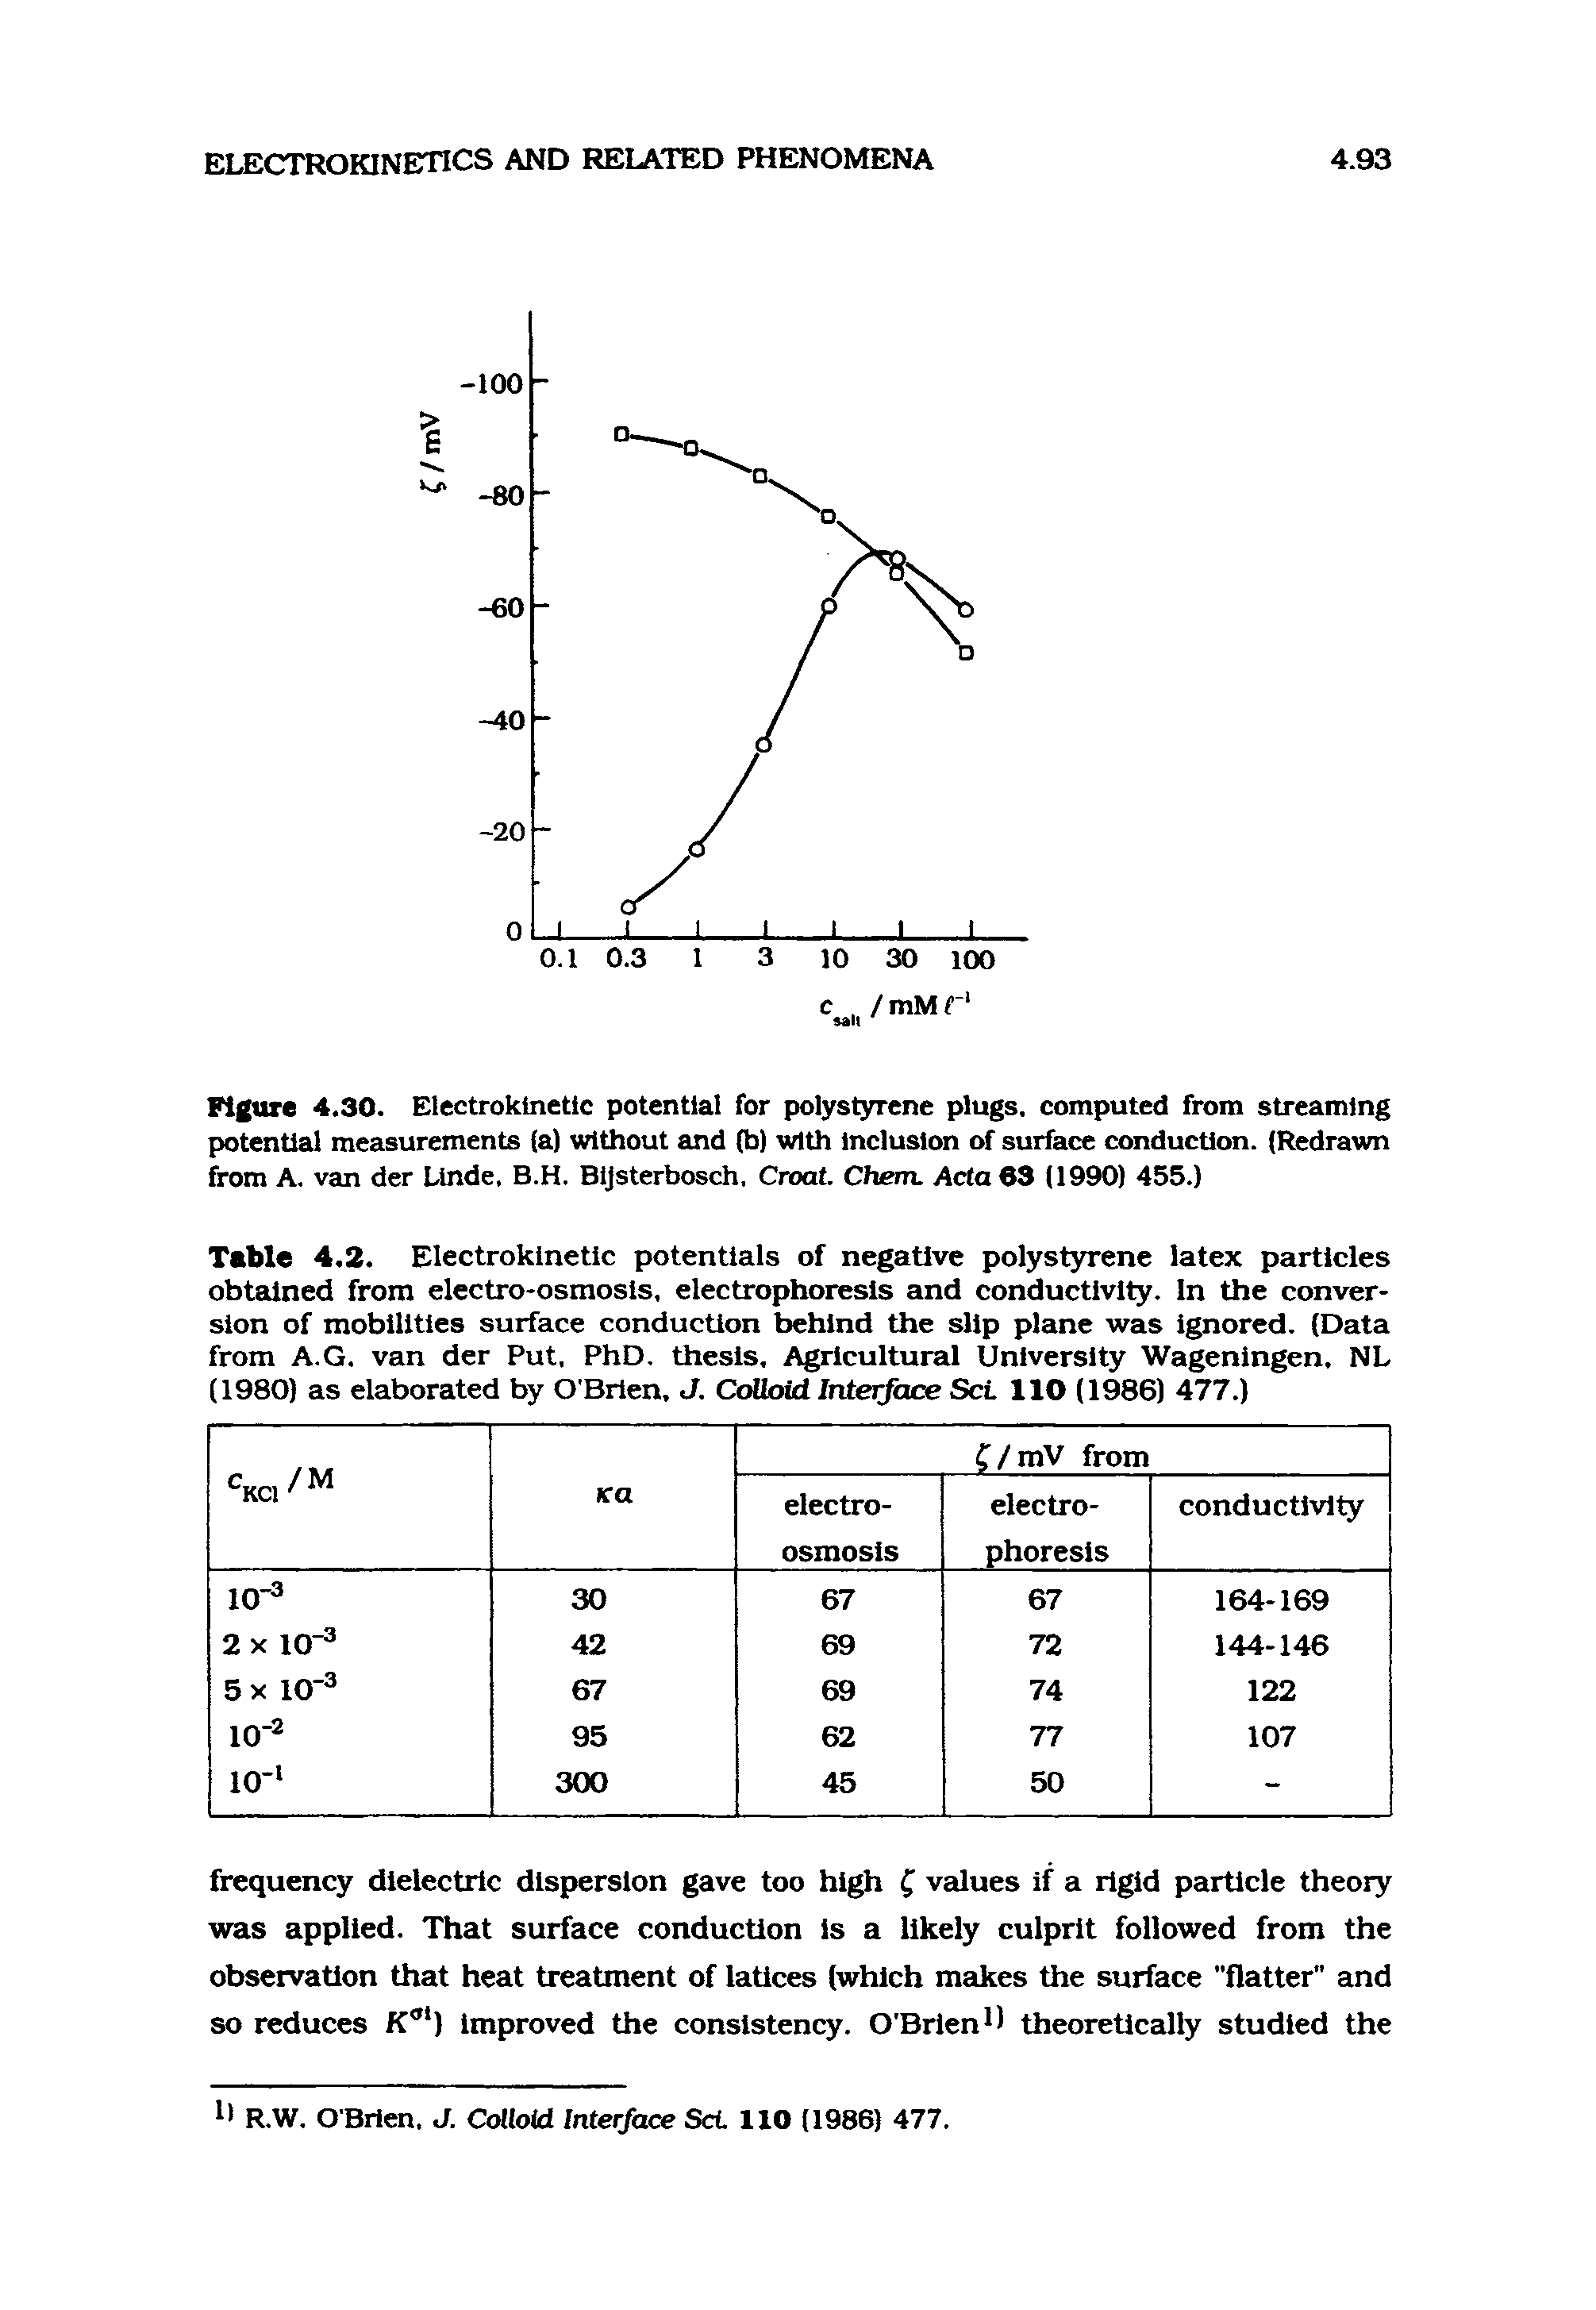 Table 4.2. Electrokinetic potentials of negative polystyrene latex particles obtained from electro-osmosis, electrophoresis and conductivity. In the conversion of mobilities surface conduction behind the slip plane was ignored. (Data from A.G. van der Put, PhD. thesis. Agricultural University Wagenlngen. NL (1980) as elaborated by O Brlen, J. CoOoid Interface Set 110 (1986) 477.)...